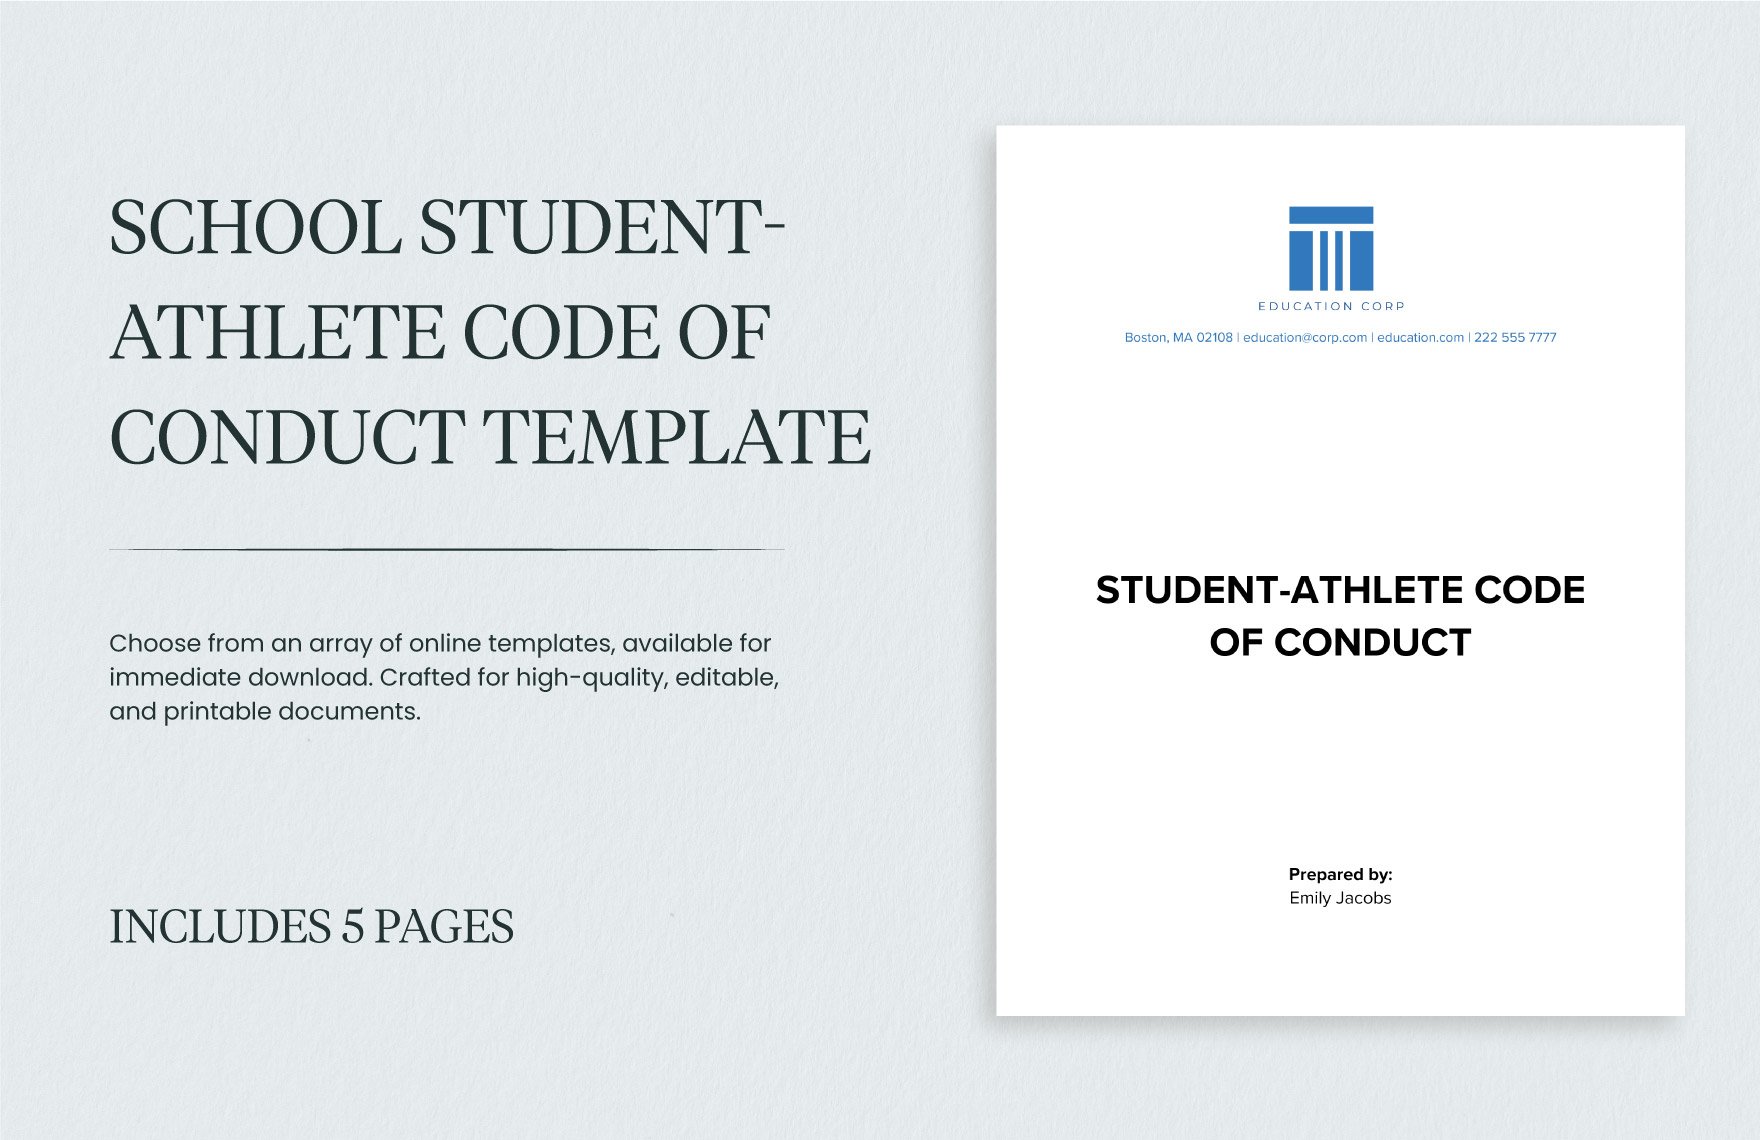 School Student-Athlete Code of Conduct Template